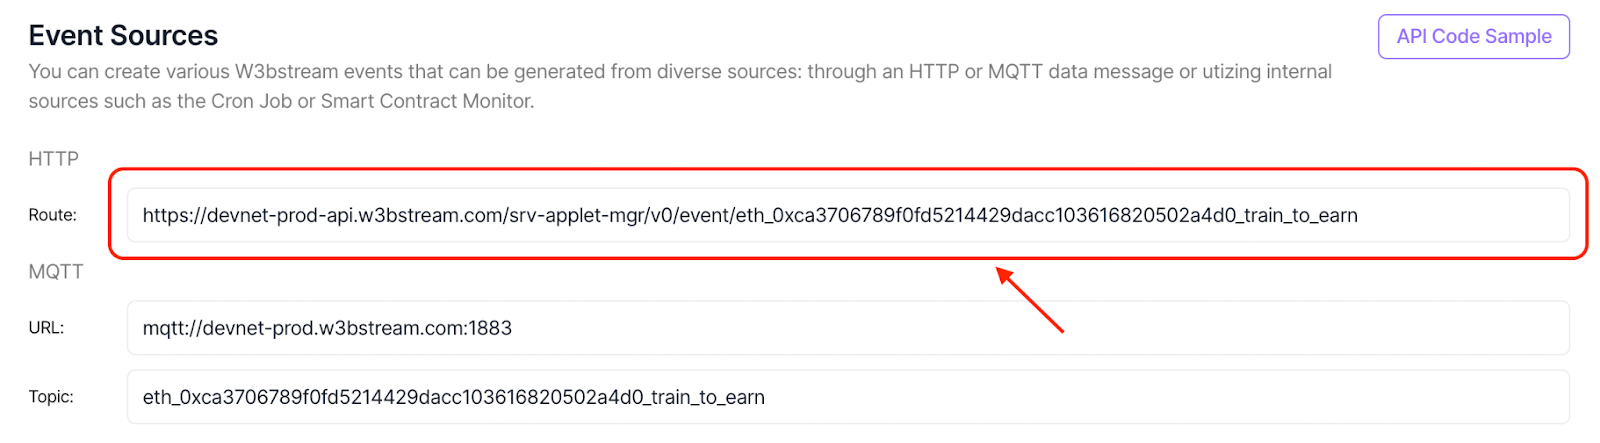 http route under Event Sources